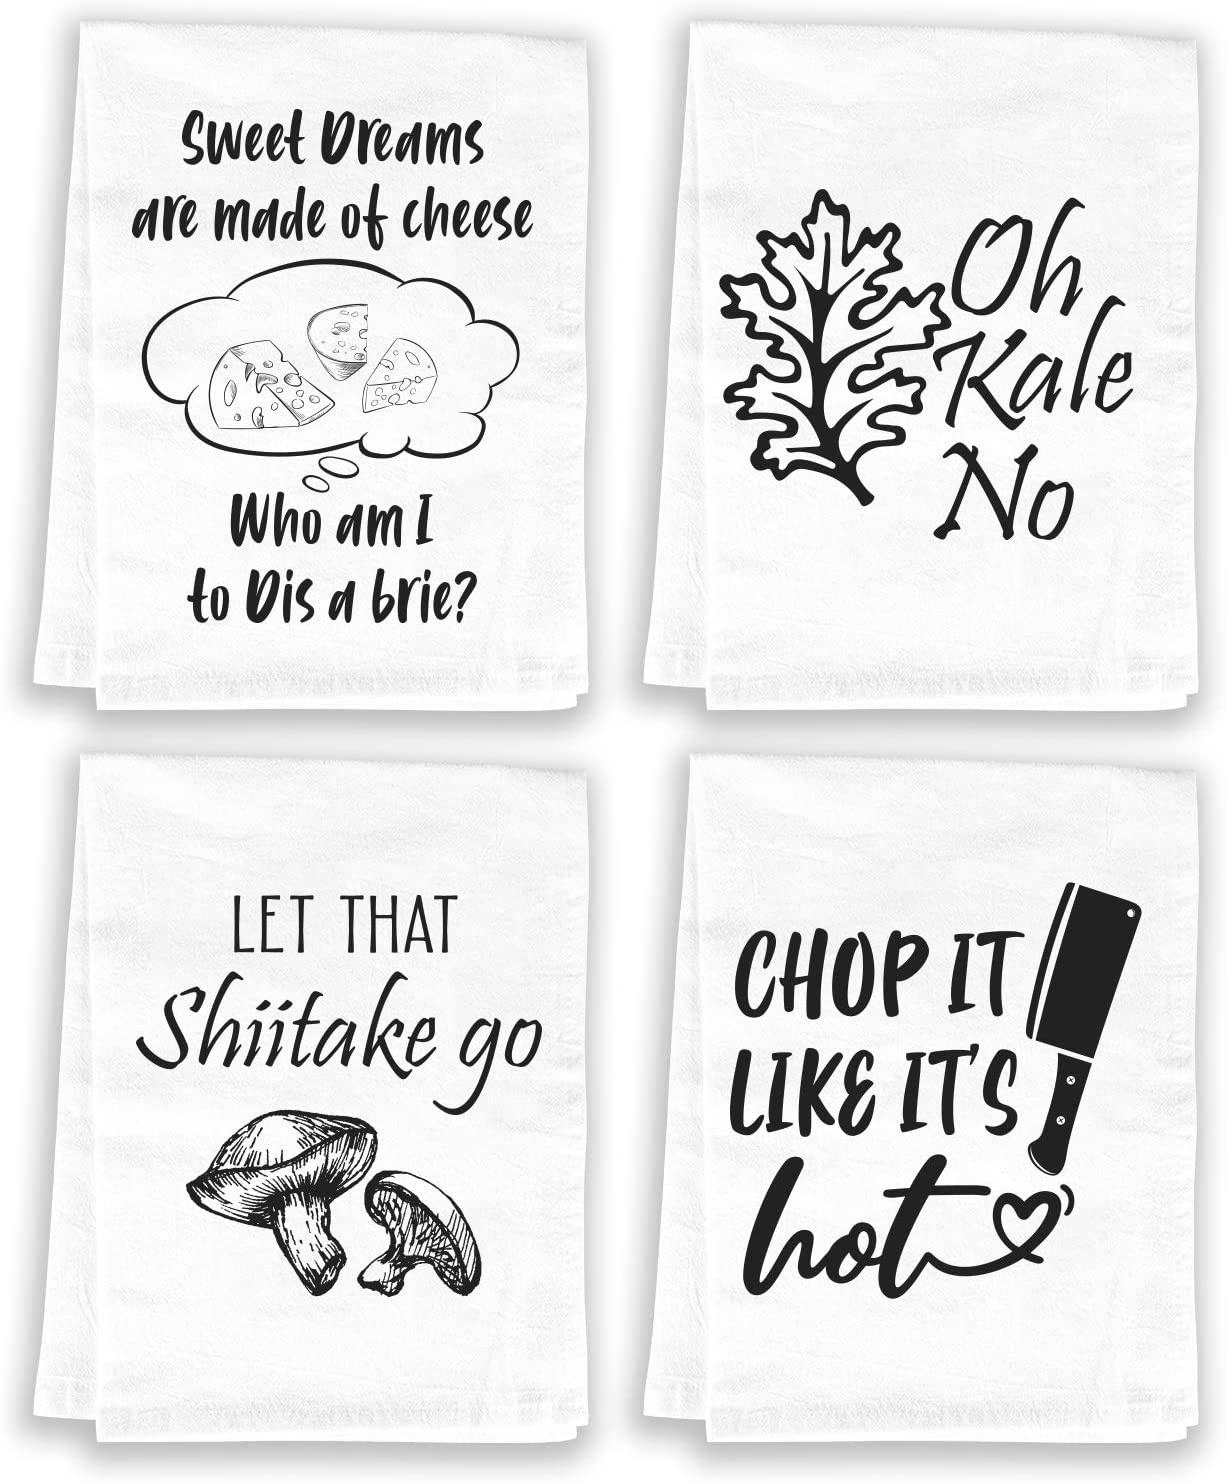 https://www.wideopencountry.com/wp-content/uploads/sites/4/eats/2021/03/Miracu-Funny-Kitchen-Towels-Punny-Dish-Towels-Housewarming-Gifts-for-Women-Hostess-Gifts-Cute-Decorative-Flour-Sack-Dish-Towels-Tea-Towels-Sets-of-4-Mothers-Day-House-Warming-Gifts-New-Home-.jpg?resize=1226%2C1483